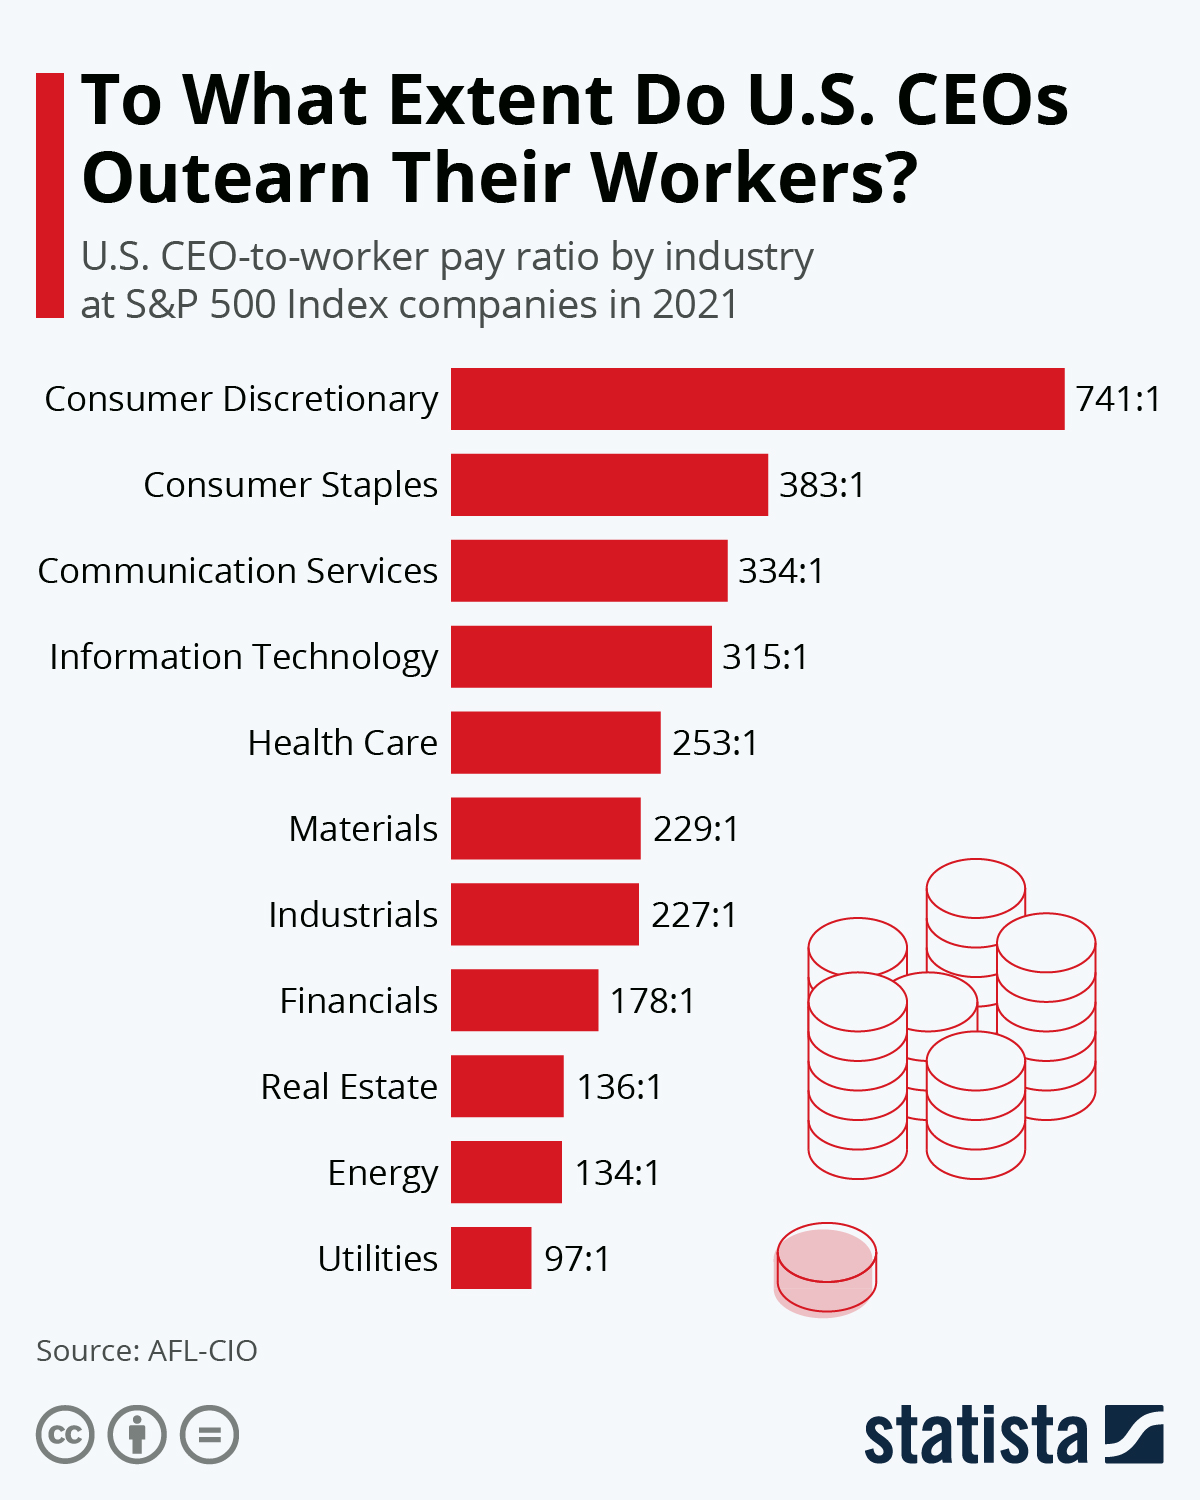 How much more do CEOs earn compared to their workers?